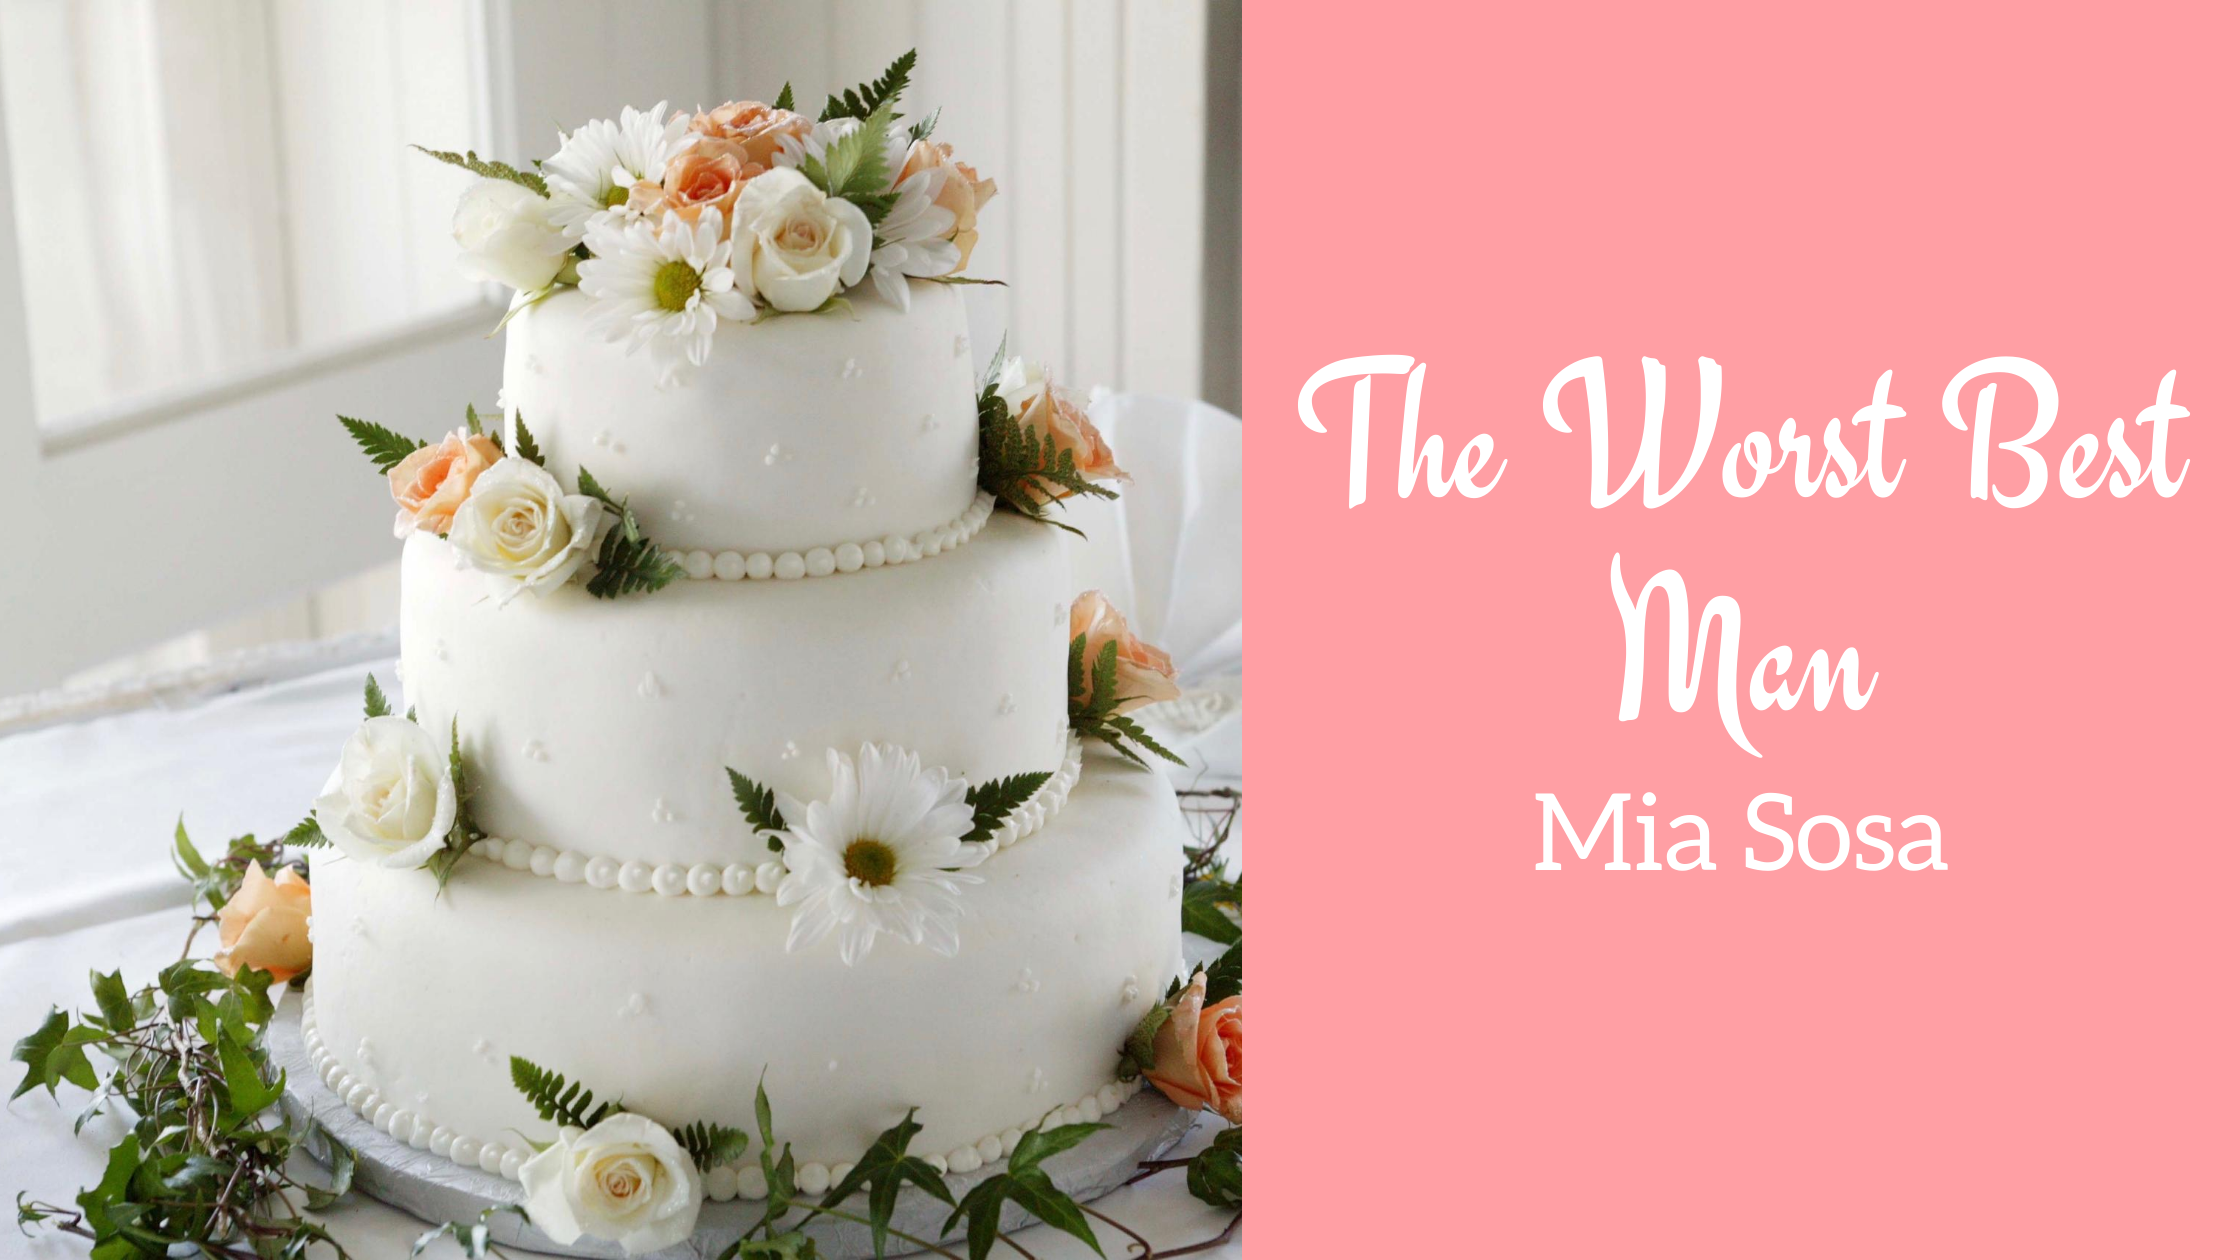 Book Review: The Worst Best Man by Mia Sosa